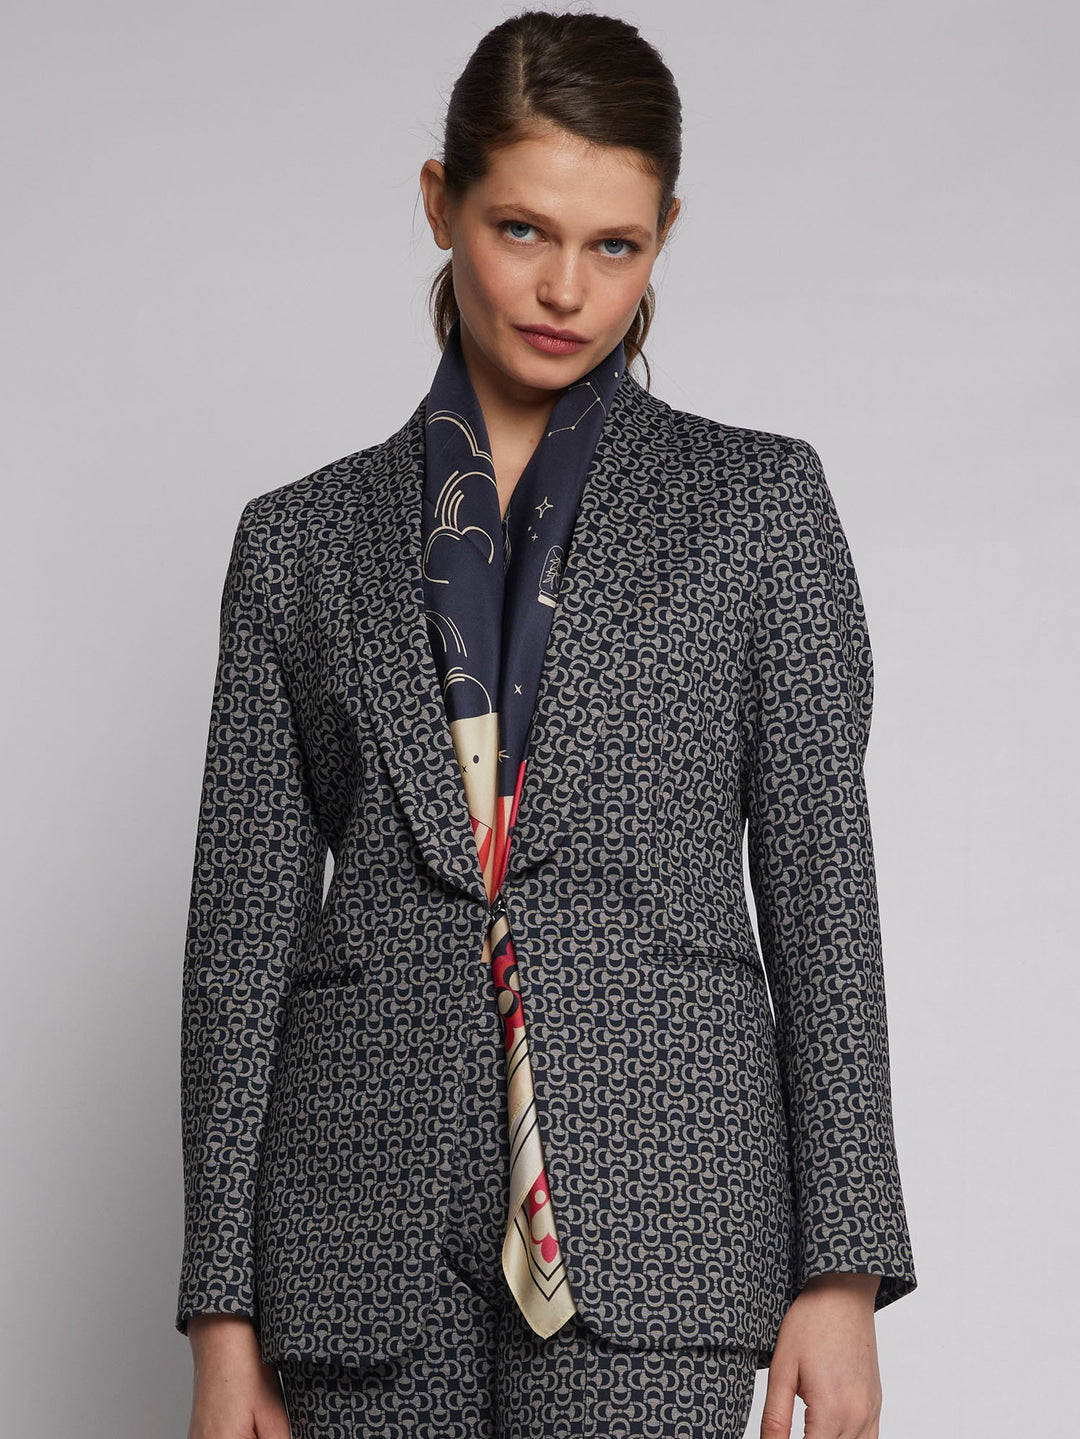 SMOKING JACKET WITH EQUESTRIAN DETAILS - VILAGALLO